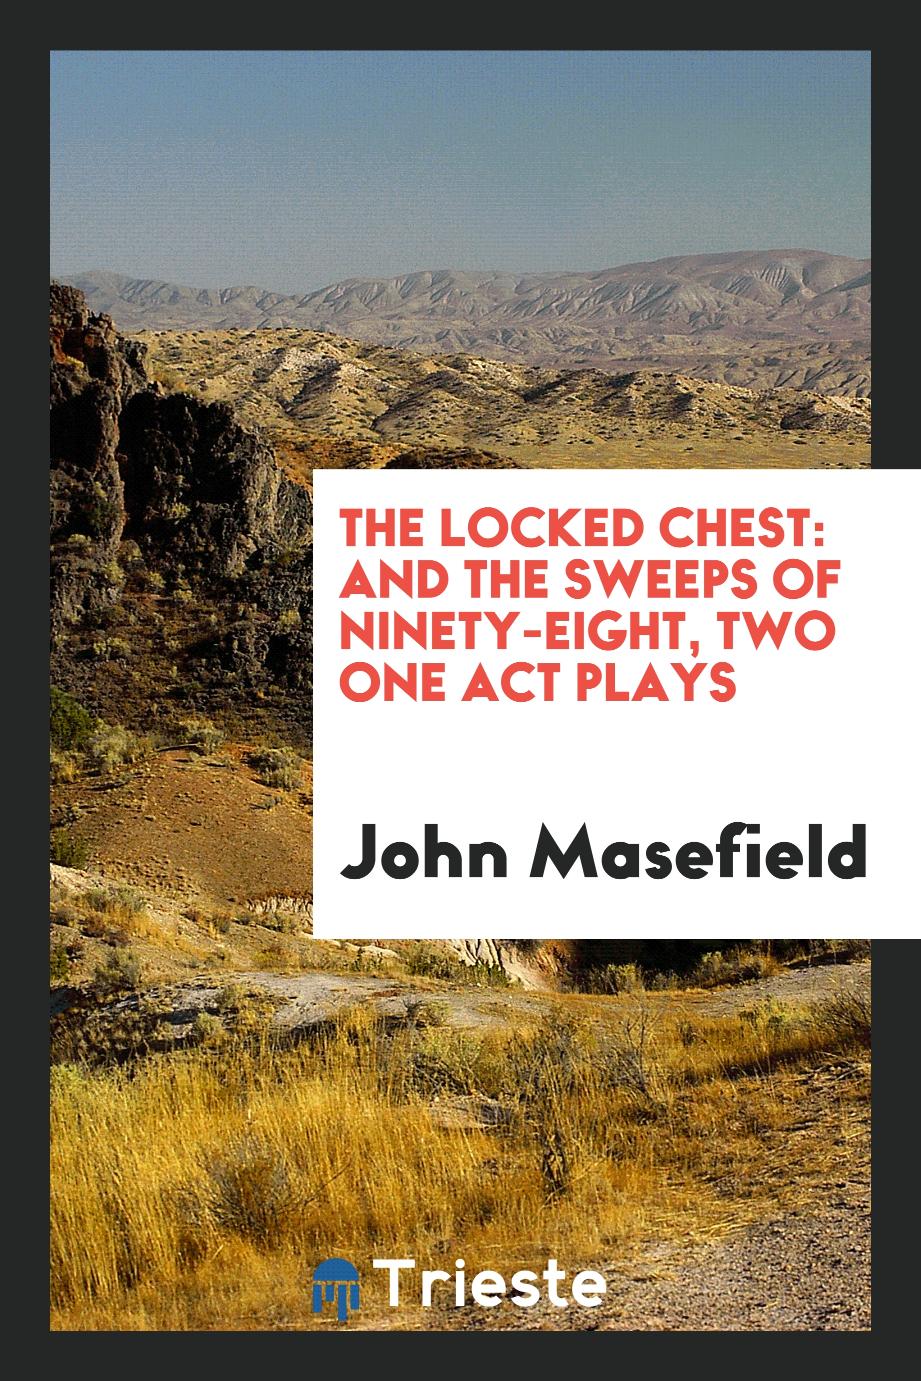 The Locked Chest: And The Sweeps of Ninety-Eight, Two One Act Plays